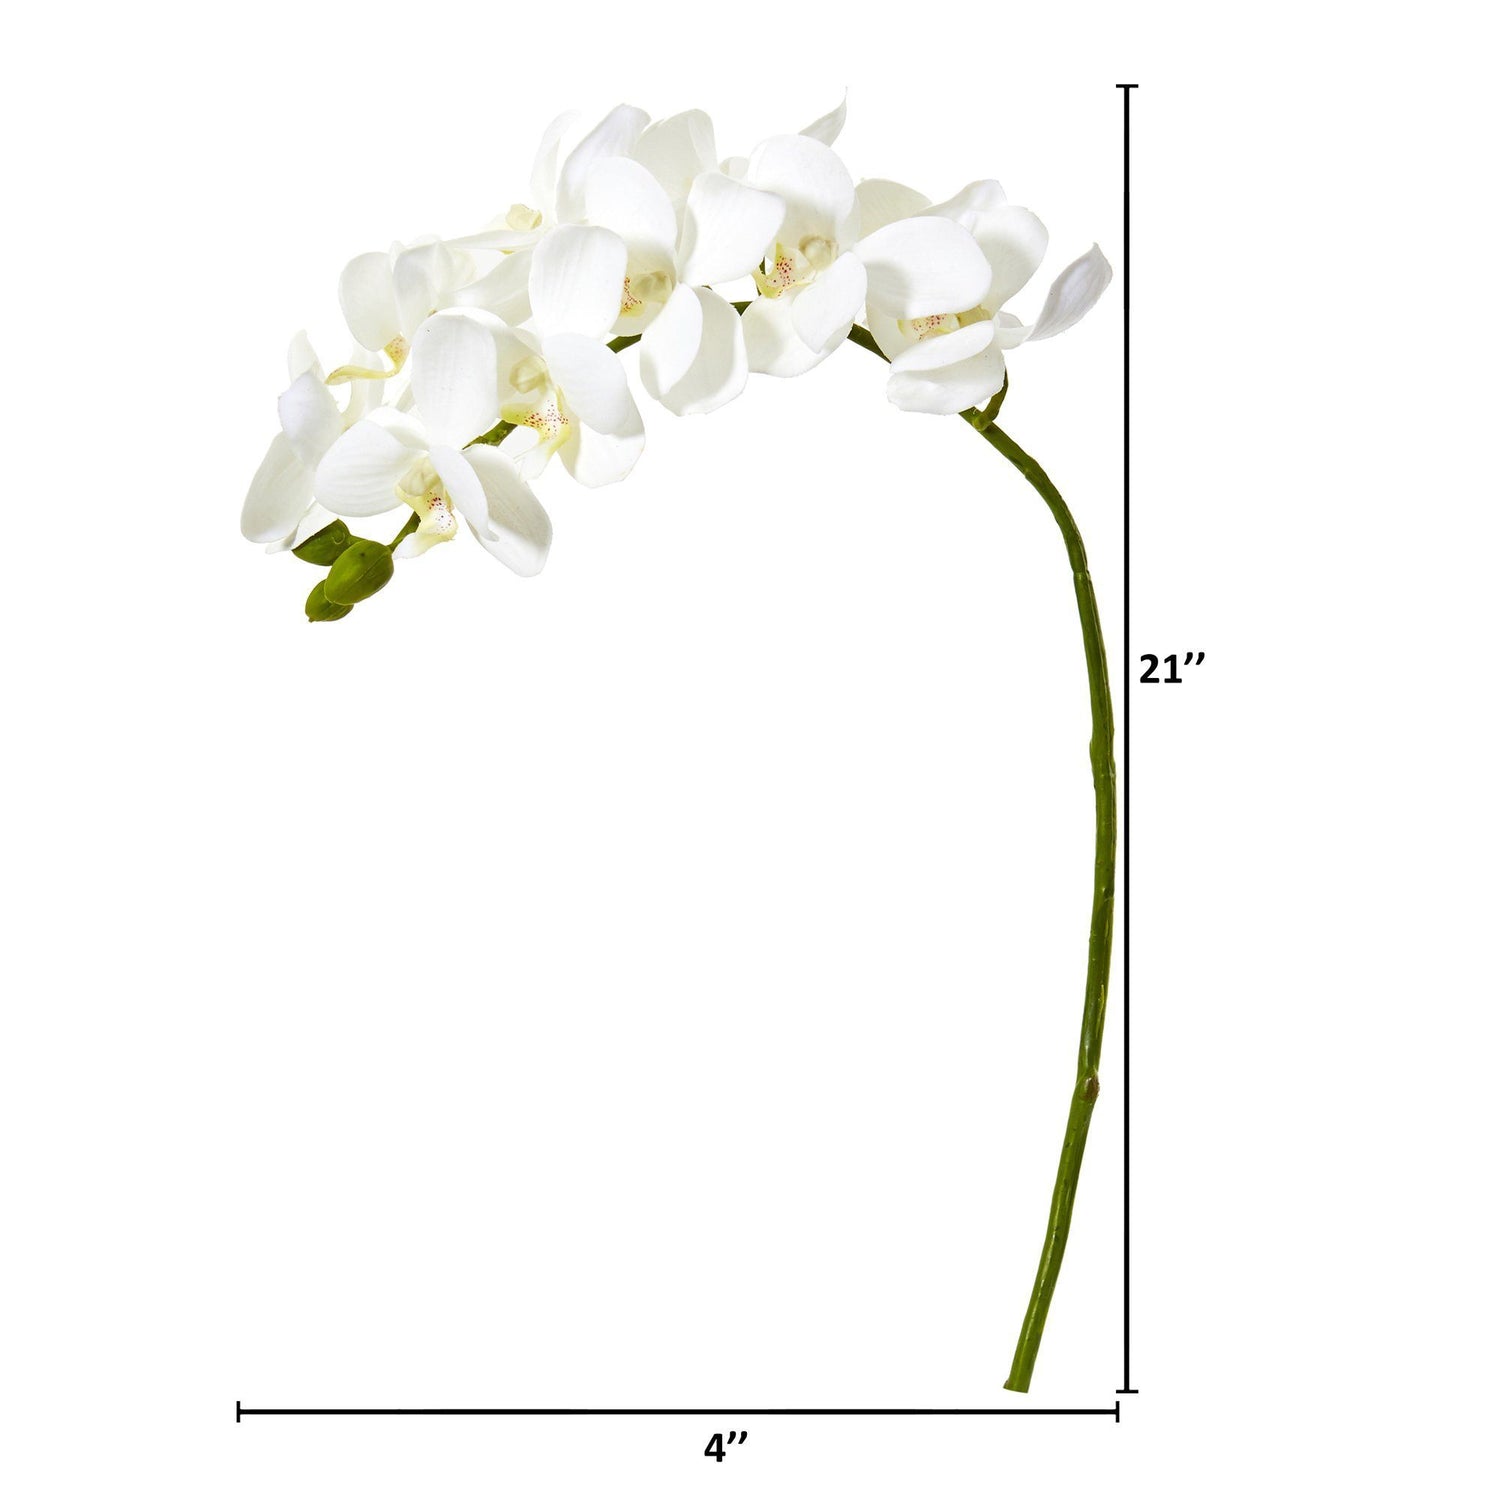 21” Artificial Phalaenopsis Orchid Flower (Set of 6)